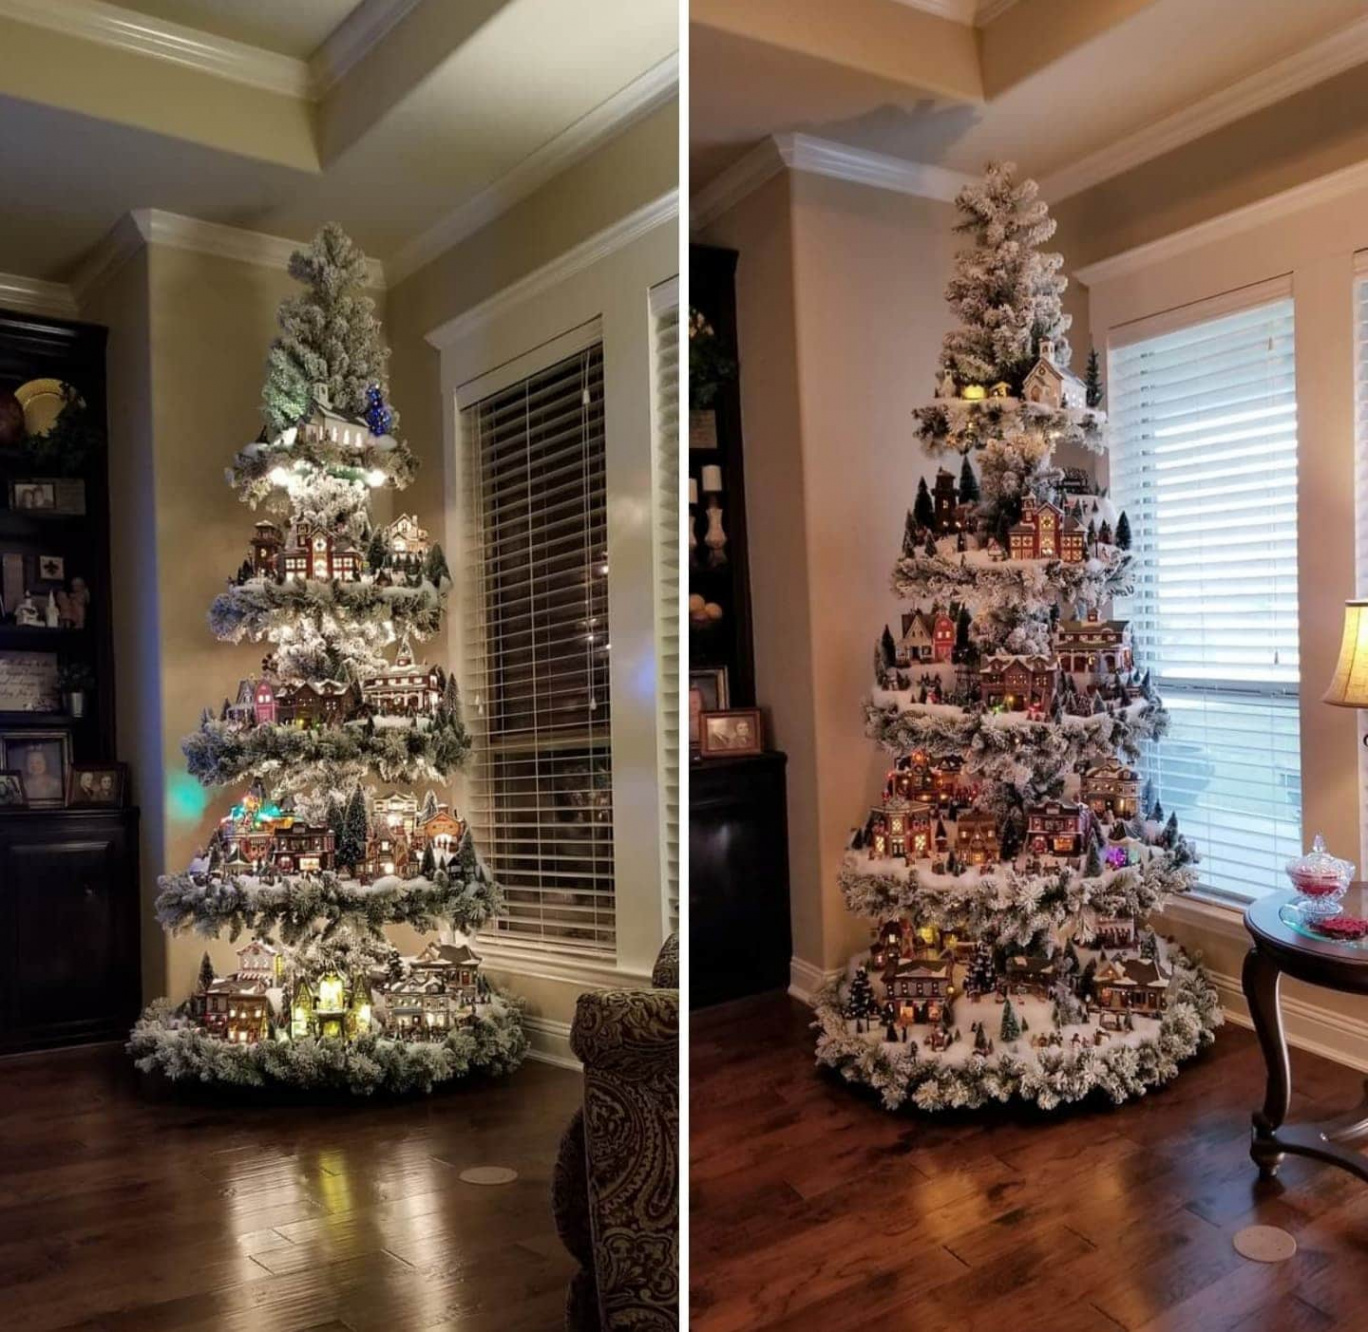 The Christmas Tree Village That Went Viral